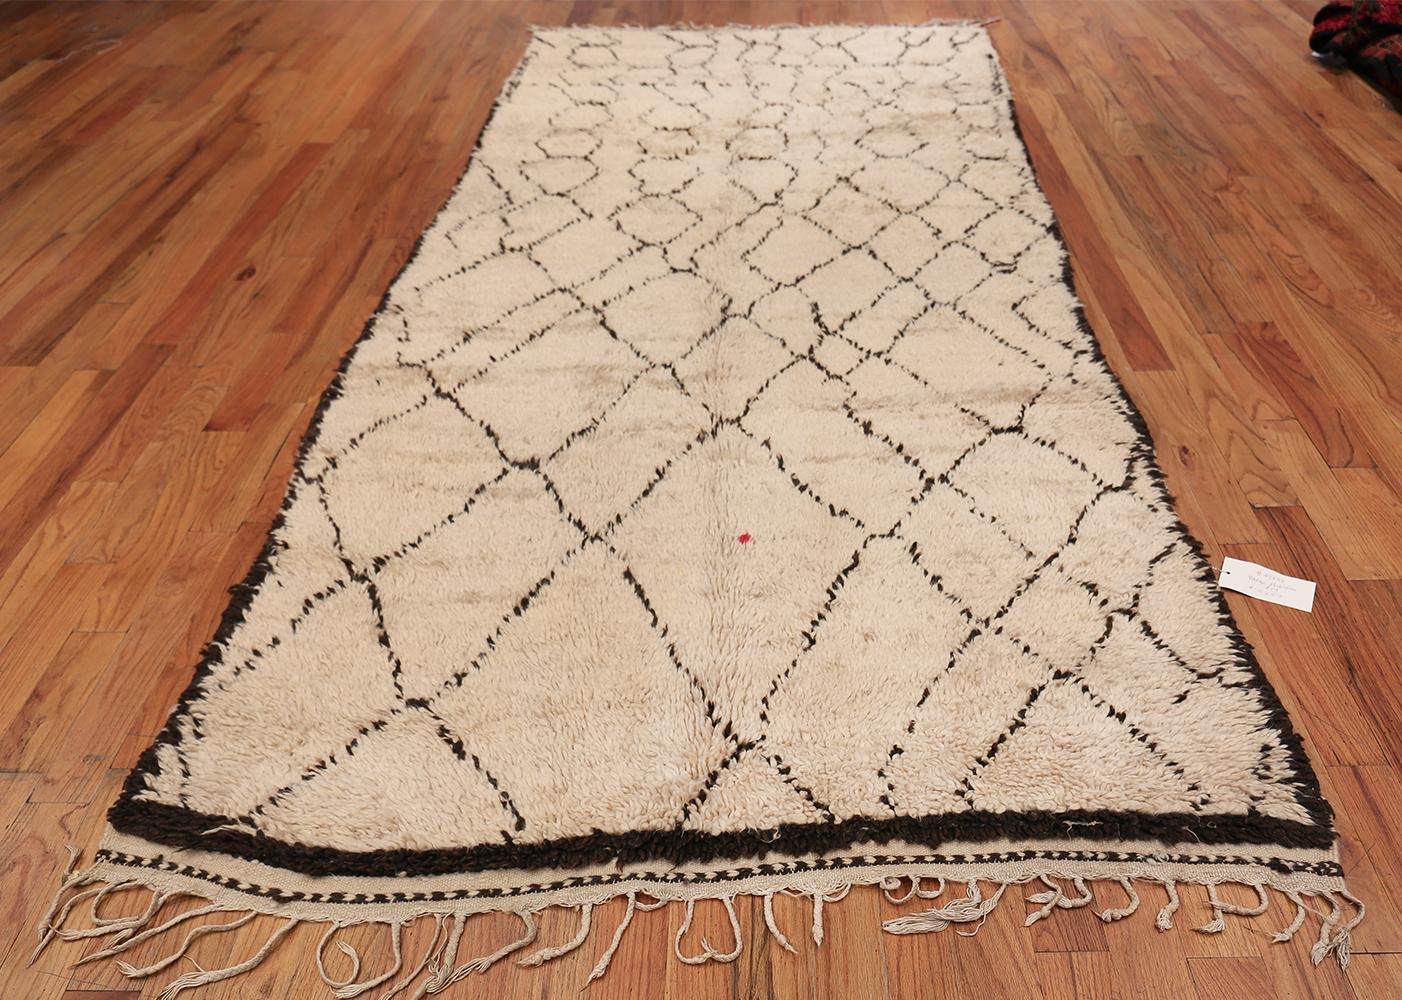 Magnificent Shag Ivory Vintage Beni Ourain Moroccan Rug, Country of Origin / Rug Type: Morocco, Circa Date: Mid – 20th Century. Size: 4 ft 10 in x 11 ft 2 in (1.47 m x 3.4 m)

This fascinating and beautiful Moroccan Beni Ourain rug appears to be